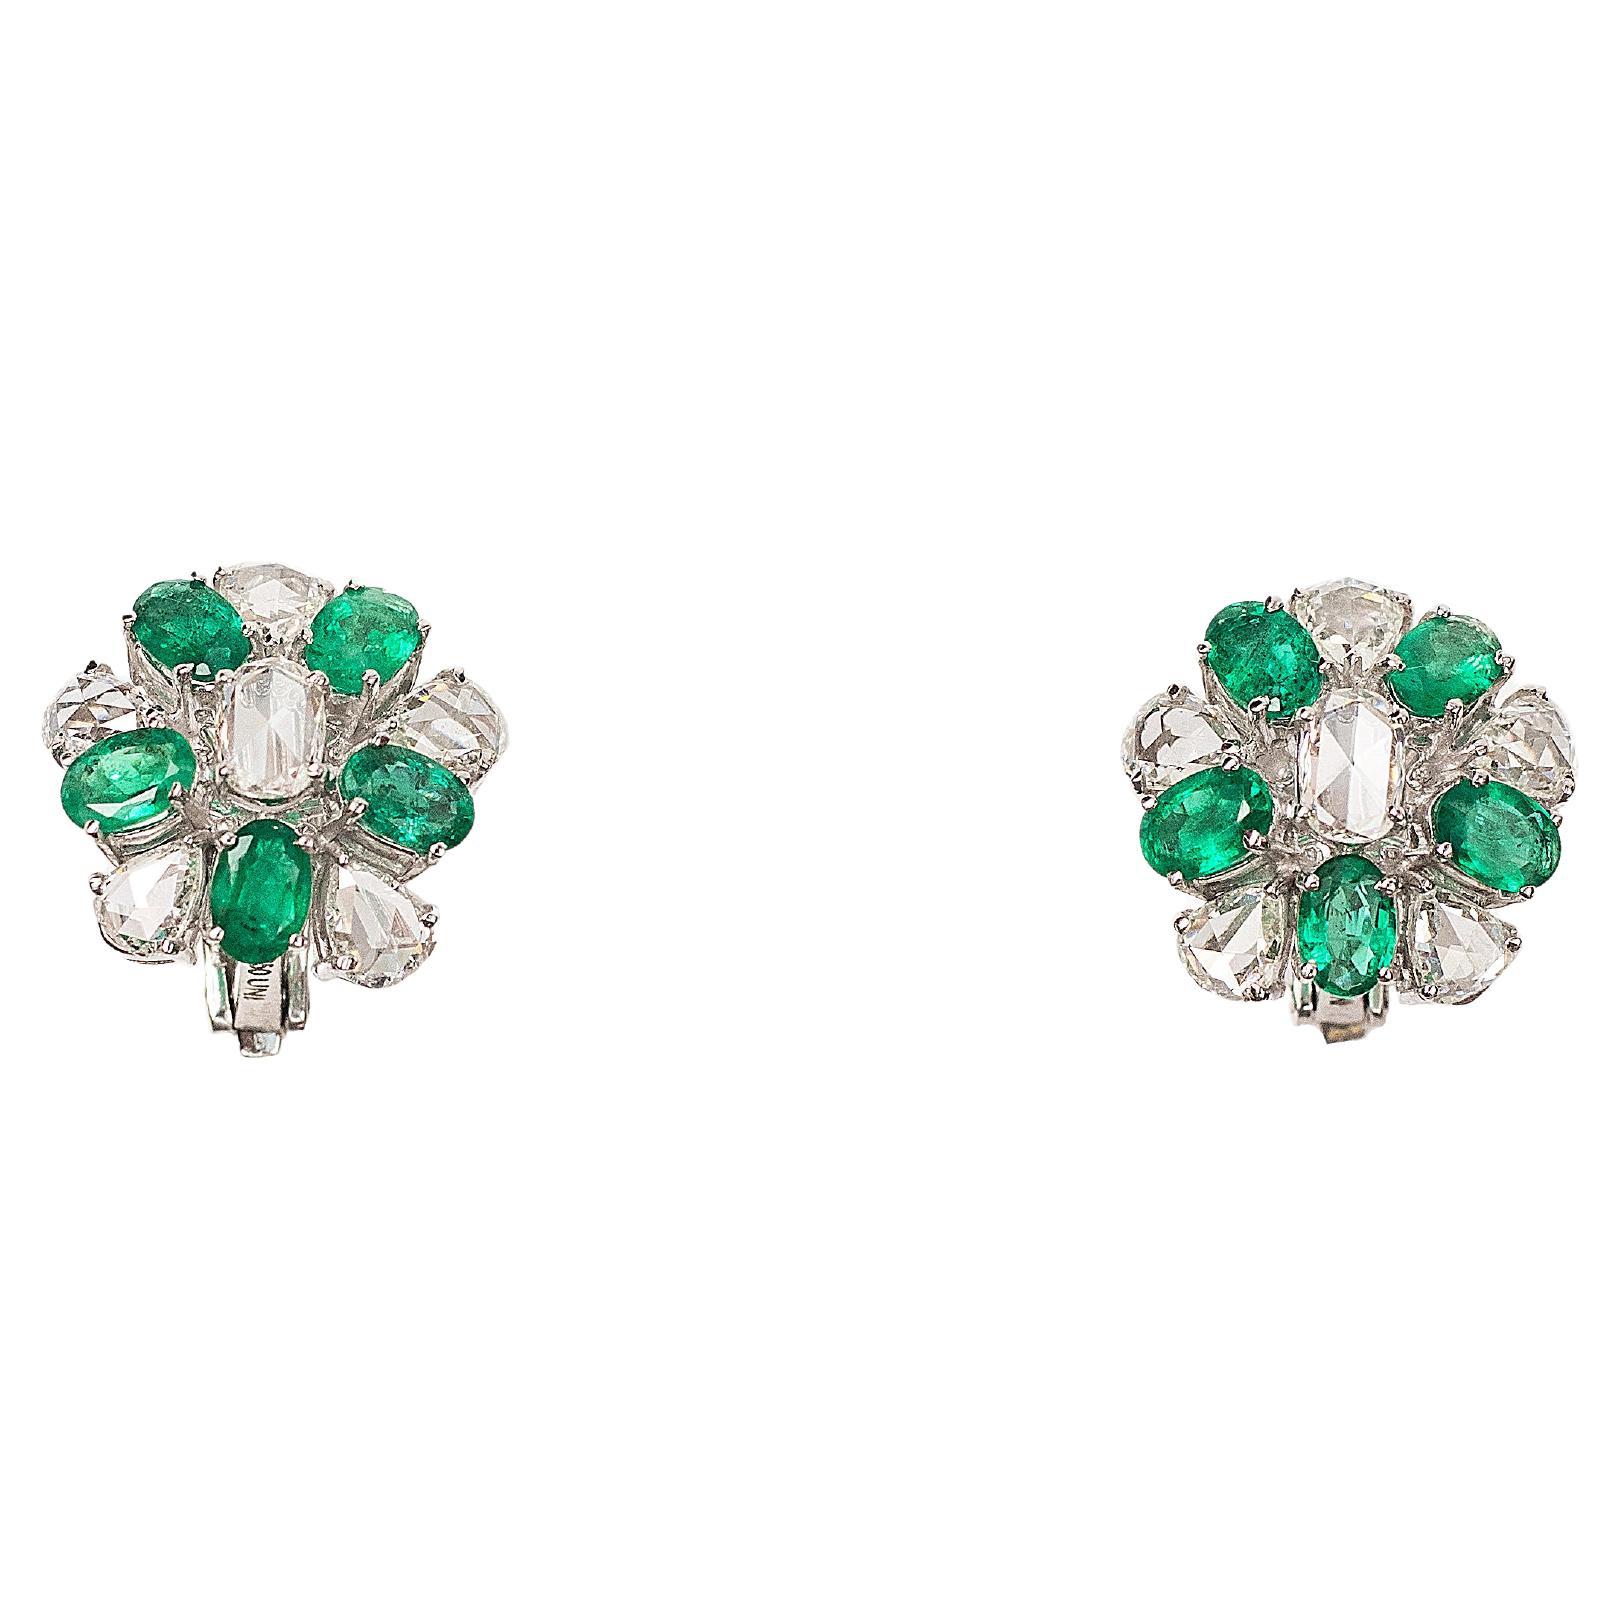 3.82 cts Rose Cut Diamonds And Natural Emerald Studs Earrings in 18K Gold